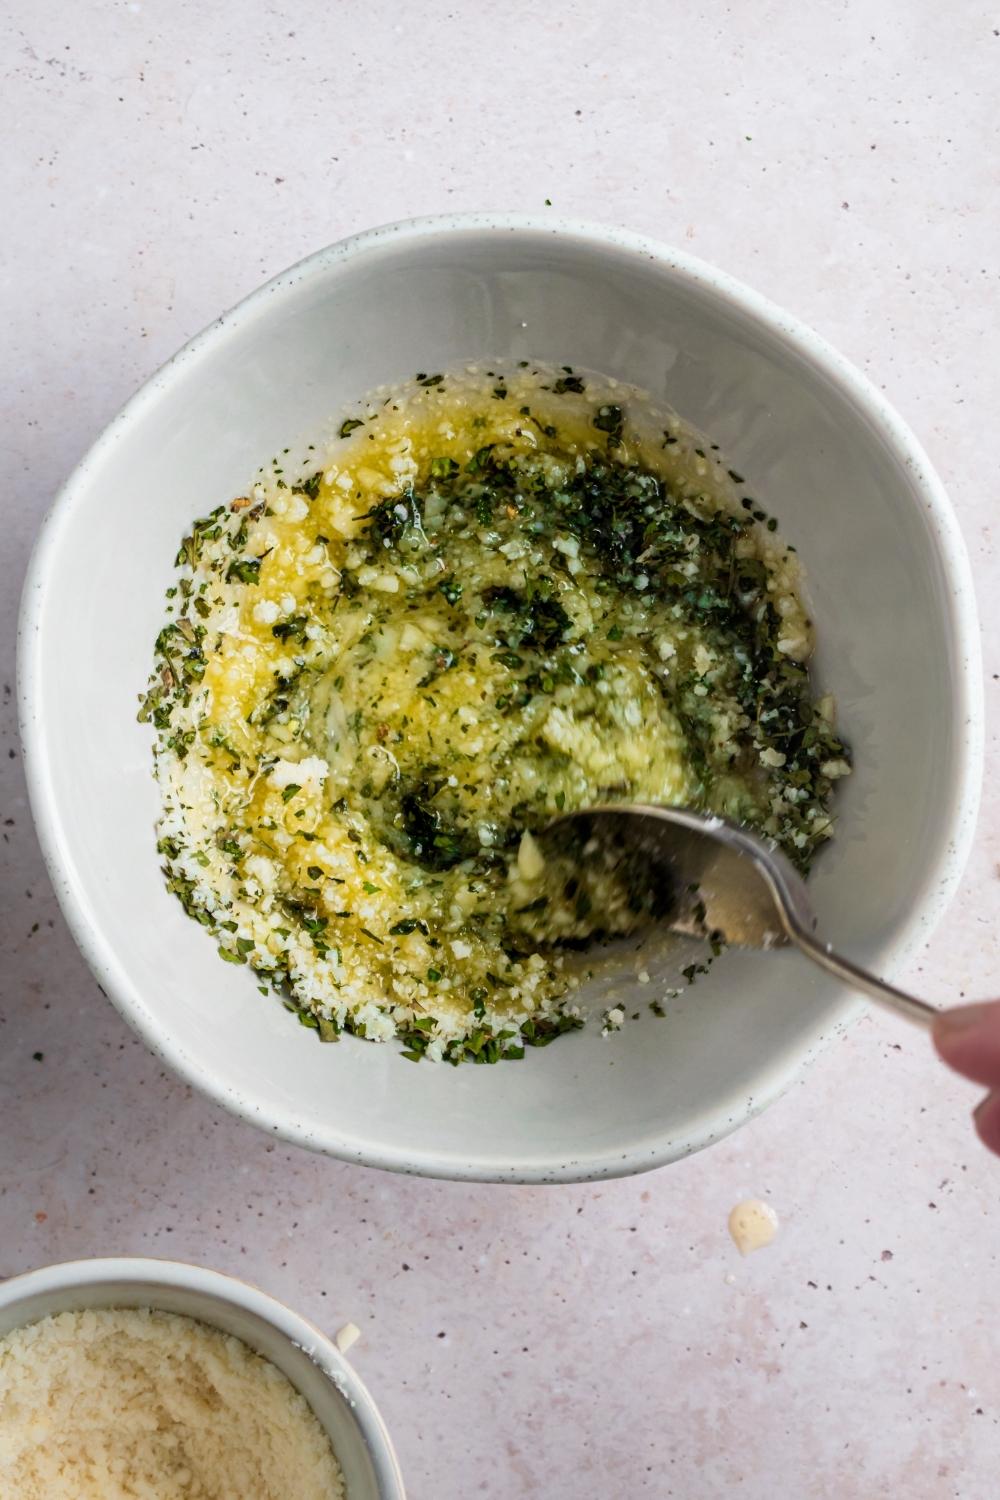 A spoon mixing minced garlic and melted butter together.